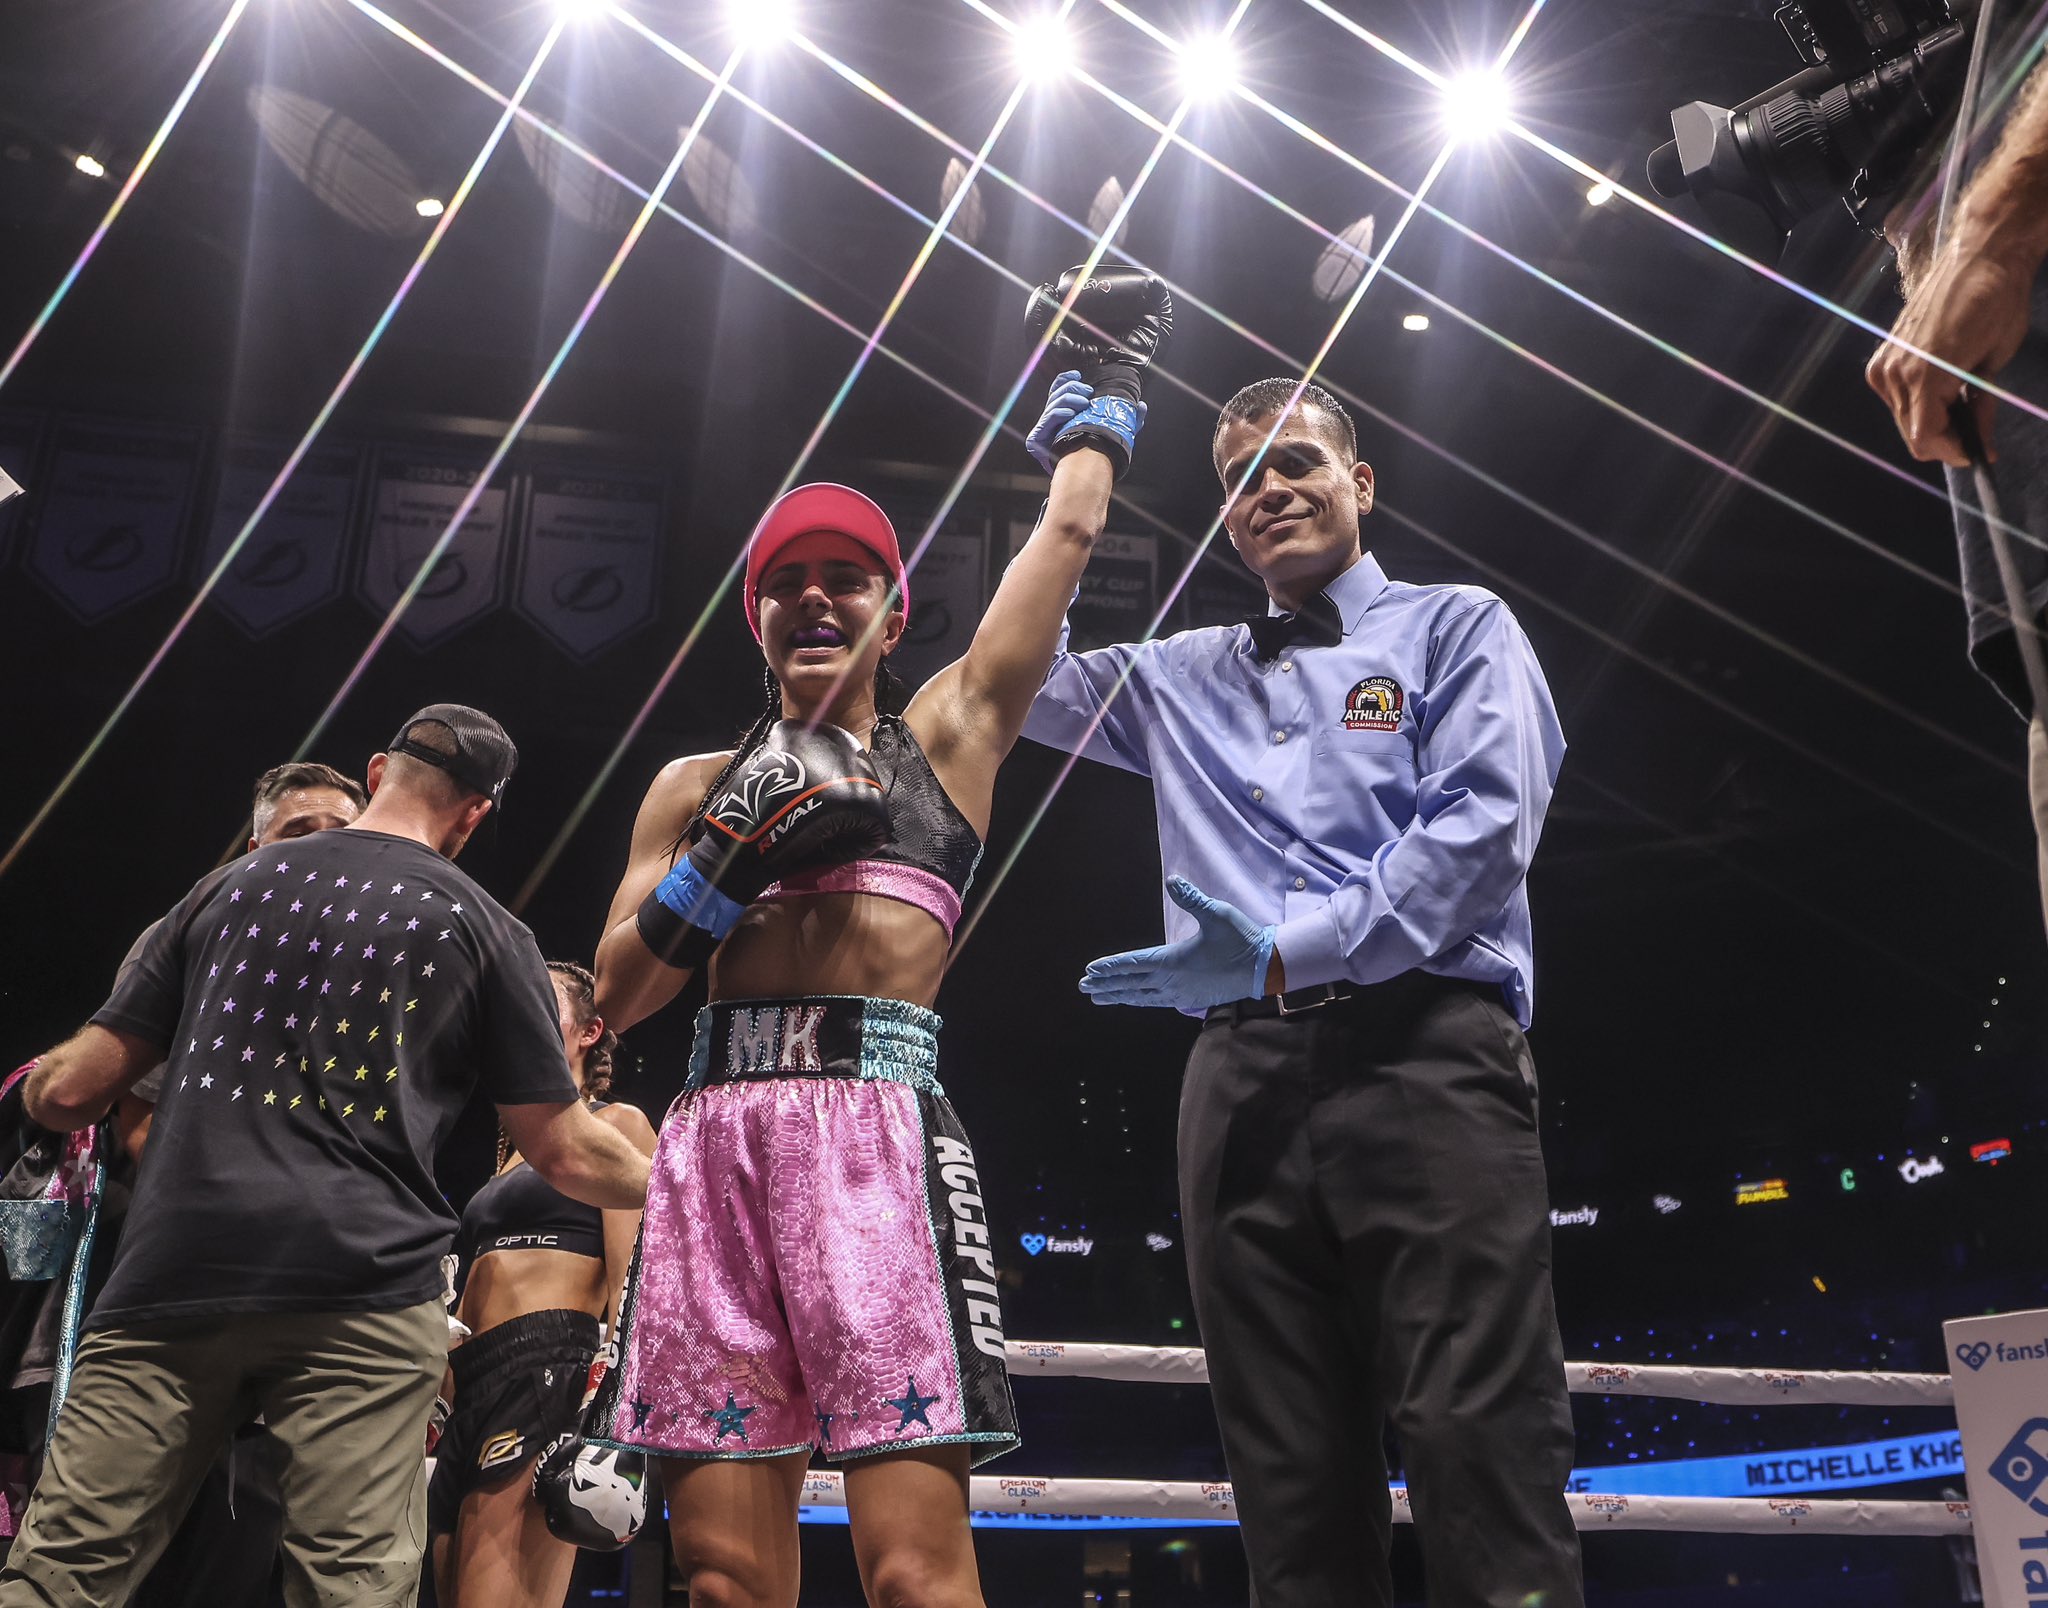 Andrea Botez will be back in boxing ring as she faces Michelle Khare next  month at Creator Clash 2